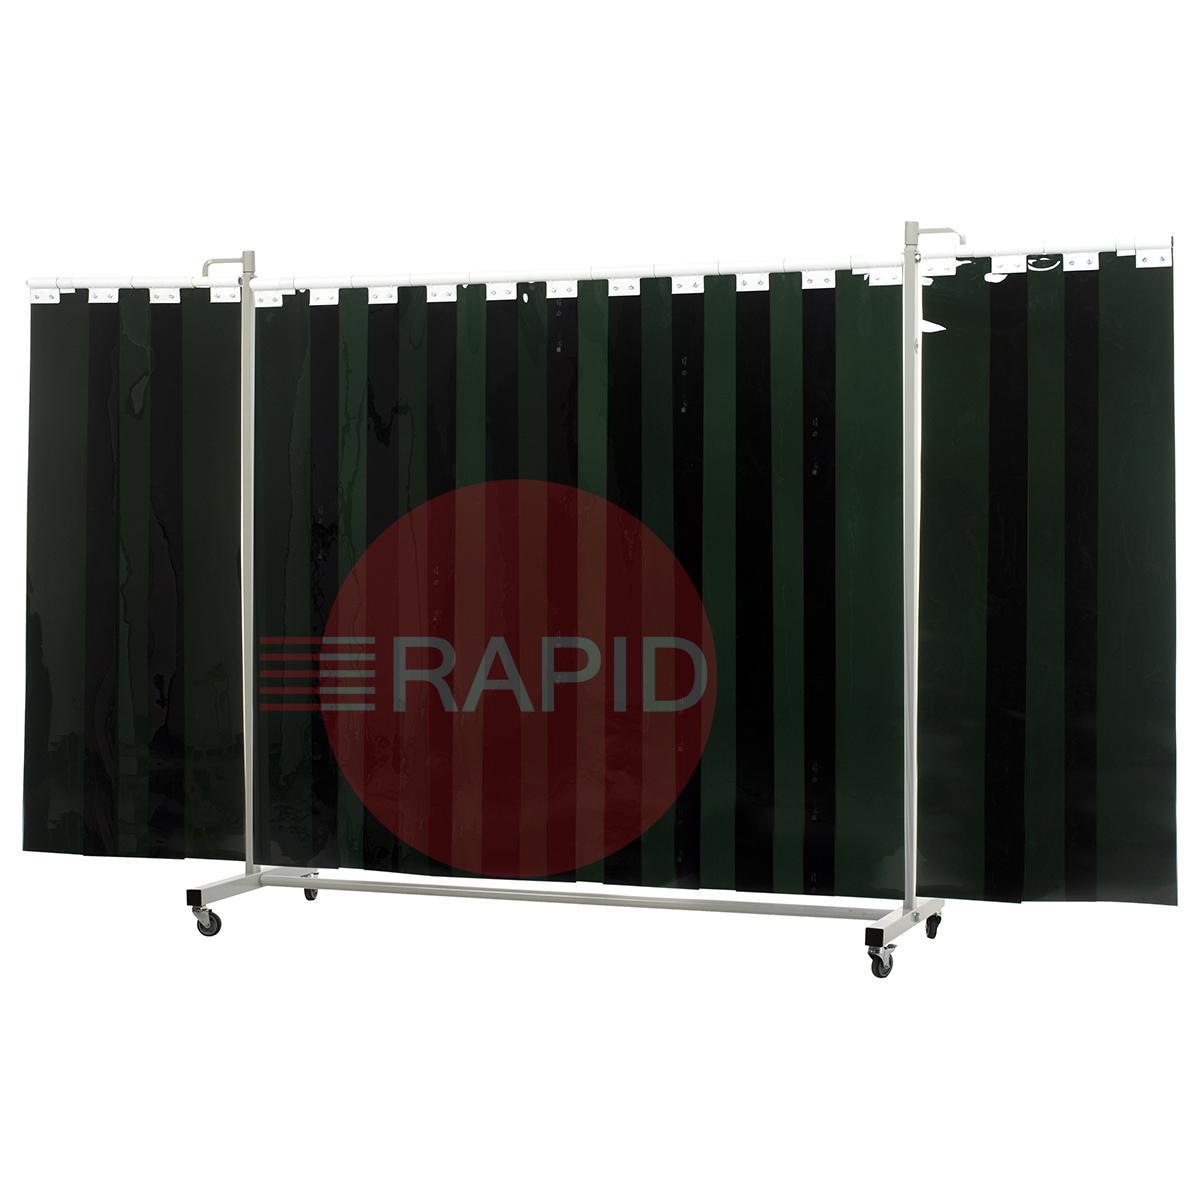 36.31.26  CEPRO Robusto Triptych Welding Screen with Green-6 Strips - 3.6m Wide x 2.2m High, Approved EN 25980